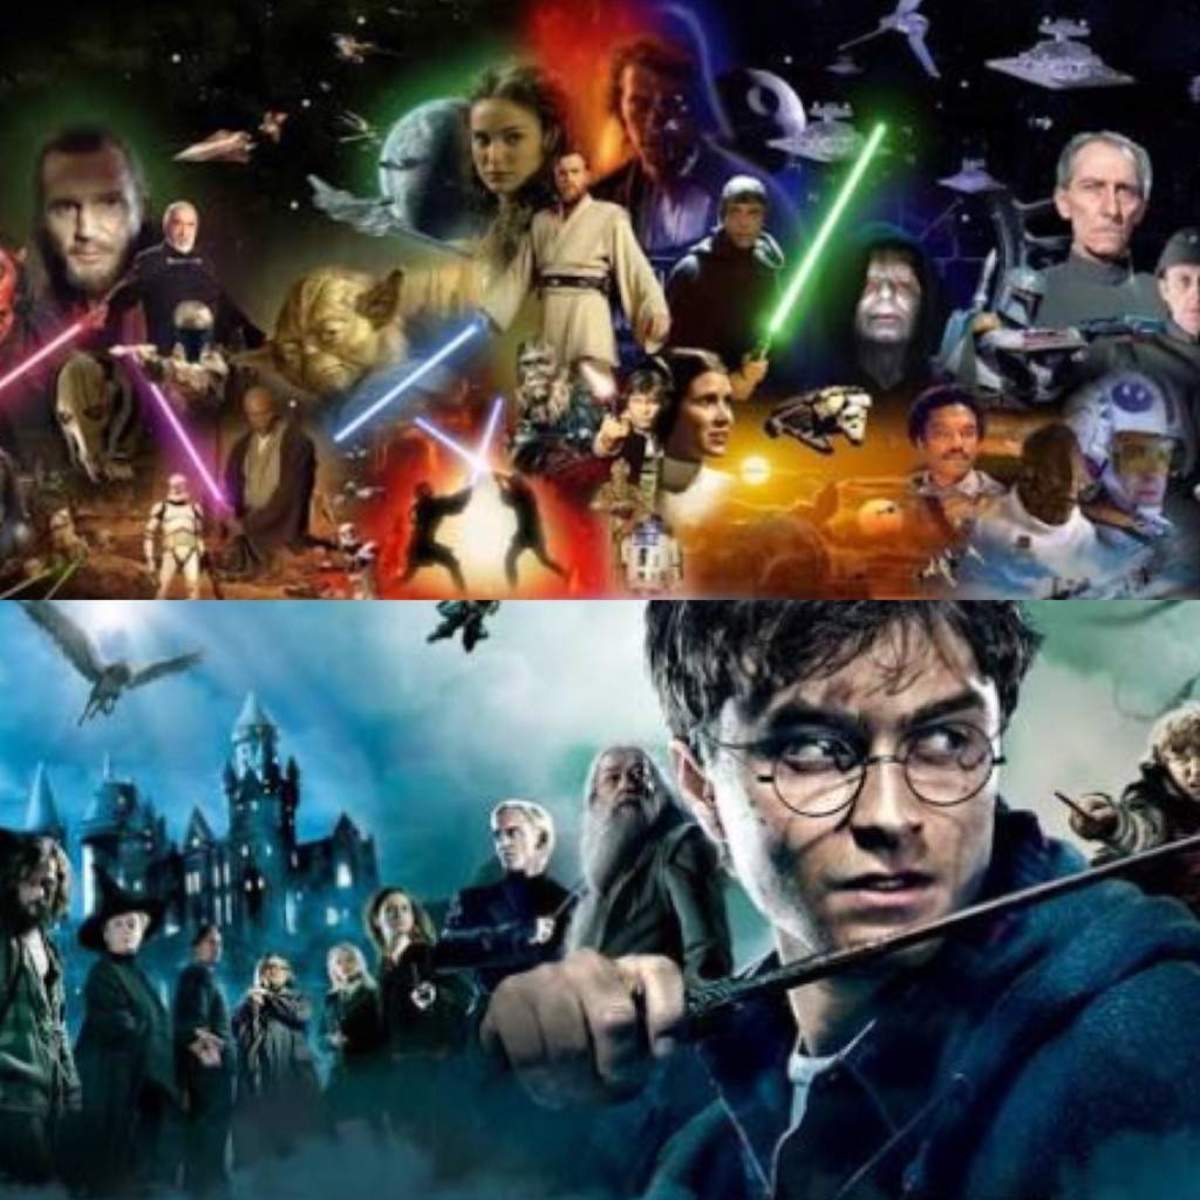 Is Harry Potter a Rip off of Star Wars?